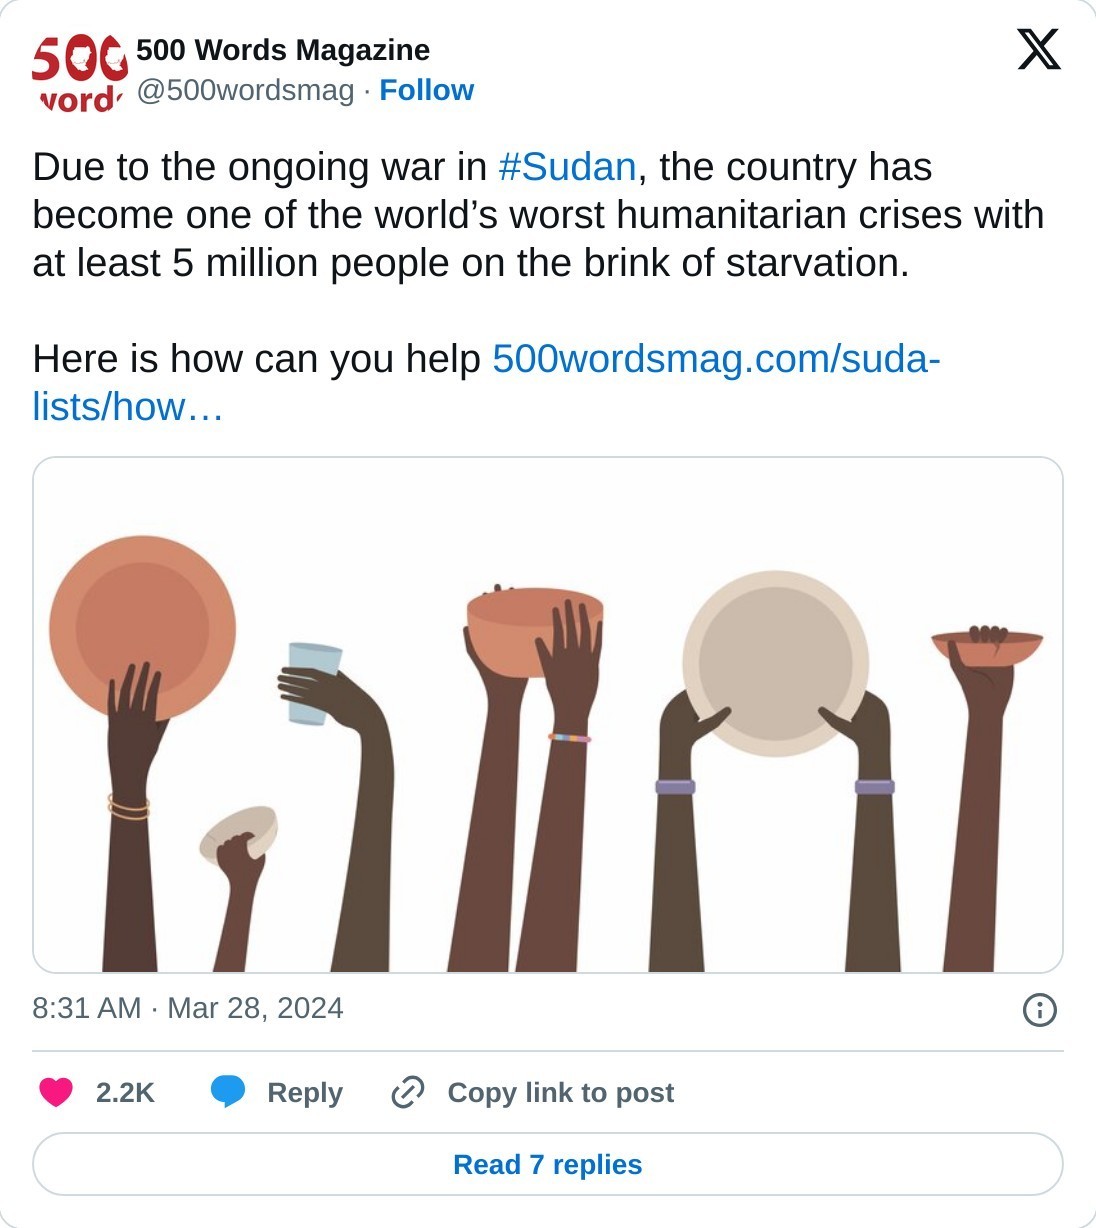 Due to the ongoing war in #Sudan, the country has become one of the world’s worst humanitarian crises with at least 5 million people on the brink of starvation.  Here is how can you help https://t.co/9IRbuiLEIO pic.twitter.com/jKDjLAE8PO  — 500 Words Magazine (@500wordsmag) March 28, 2024